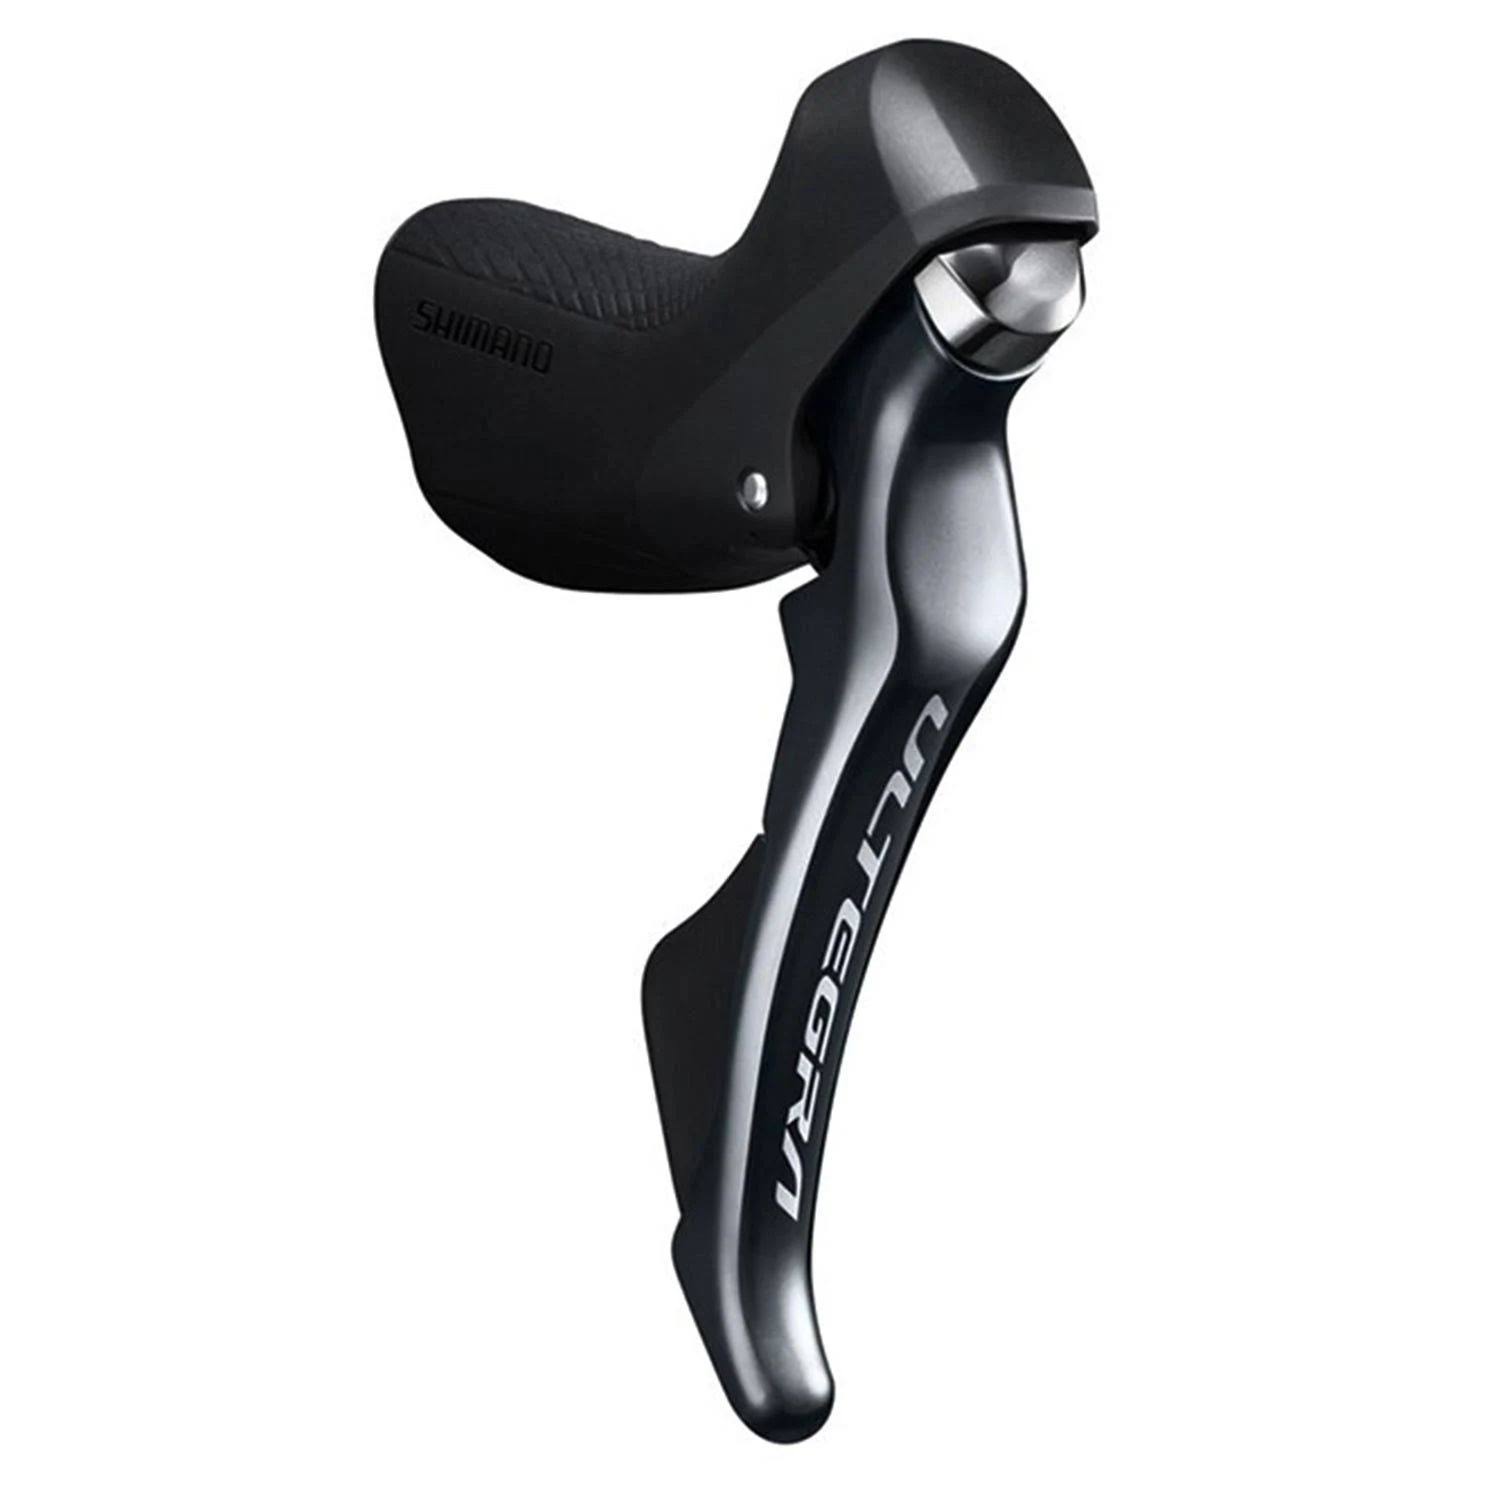 Shimano Ultegra R8000 Right Mechanical Shifter Lever - 11 Speed